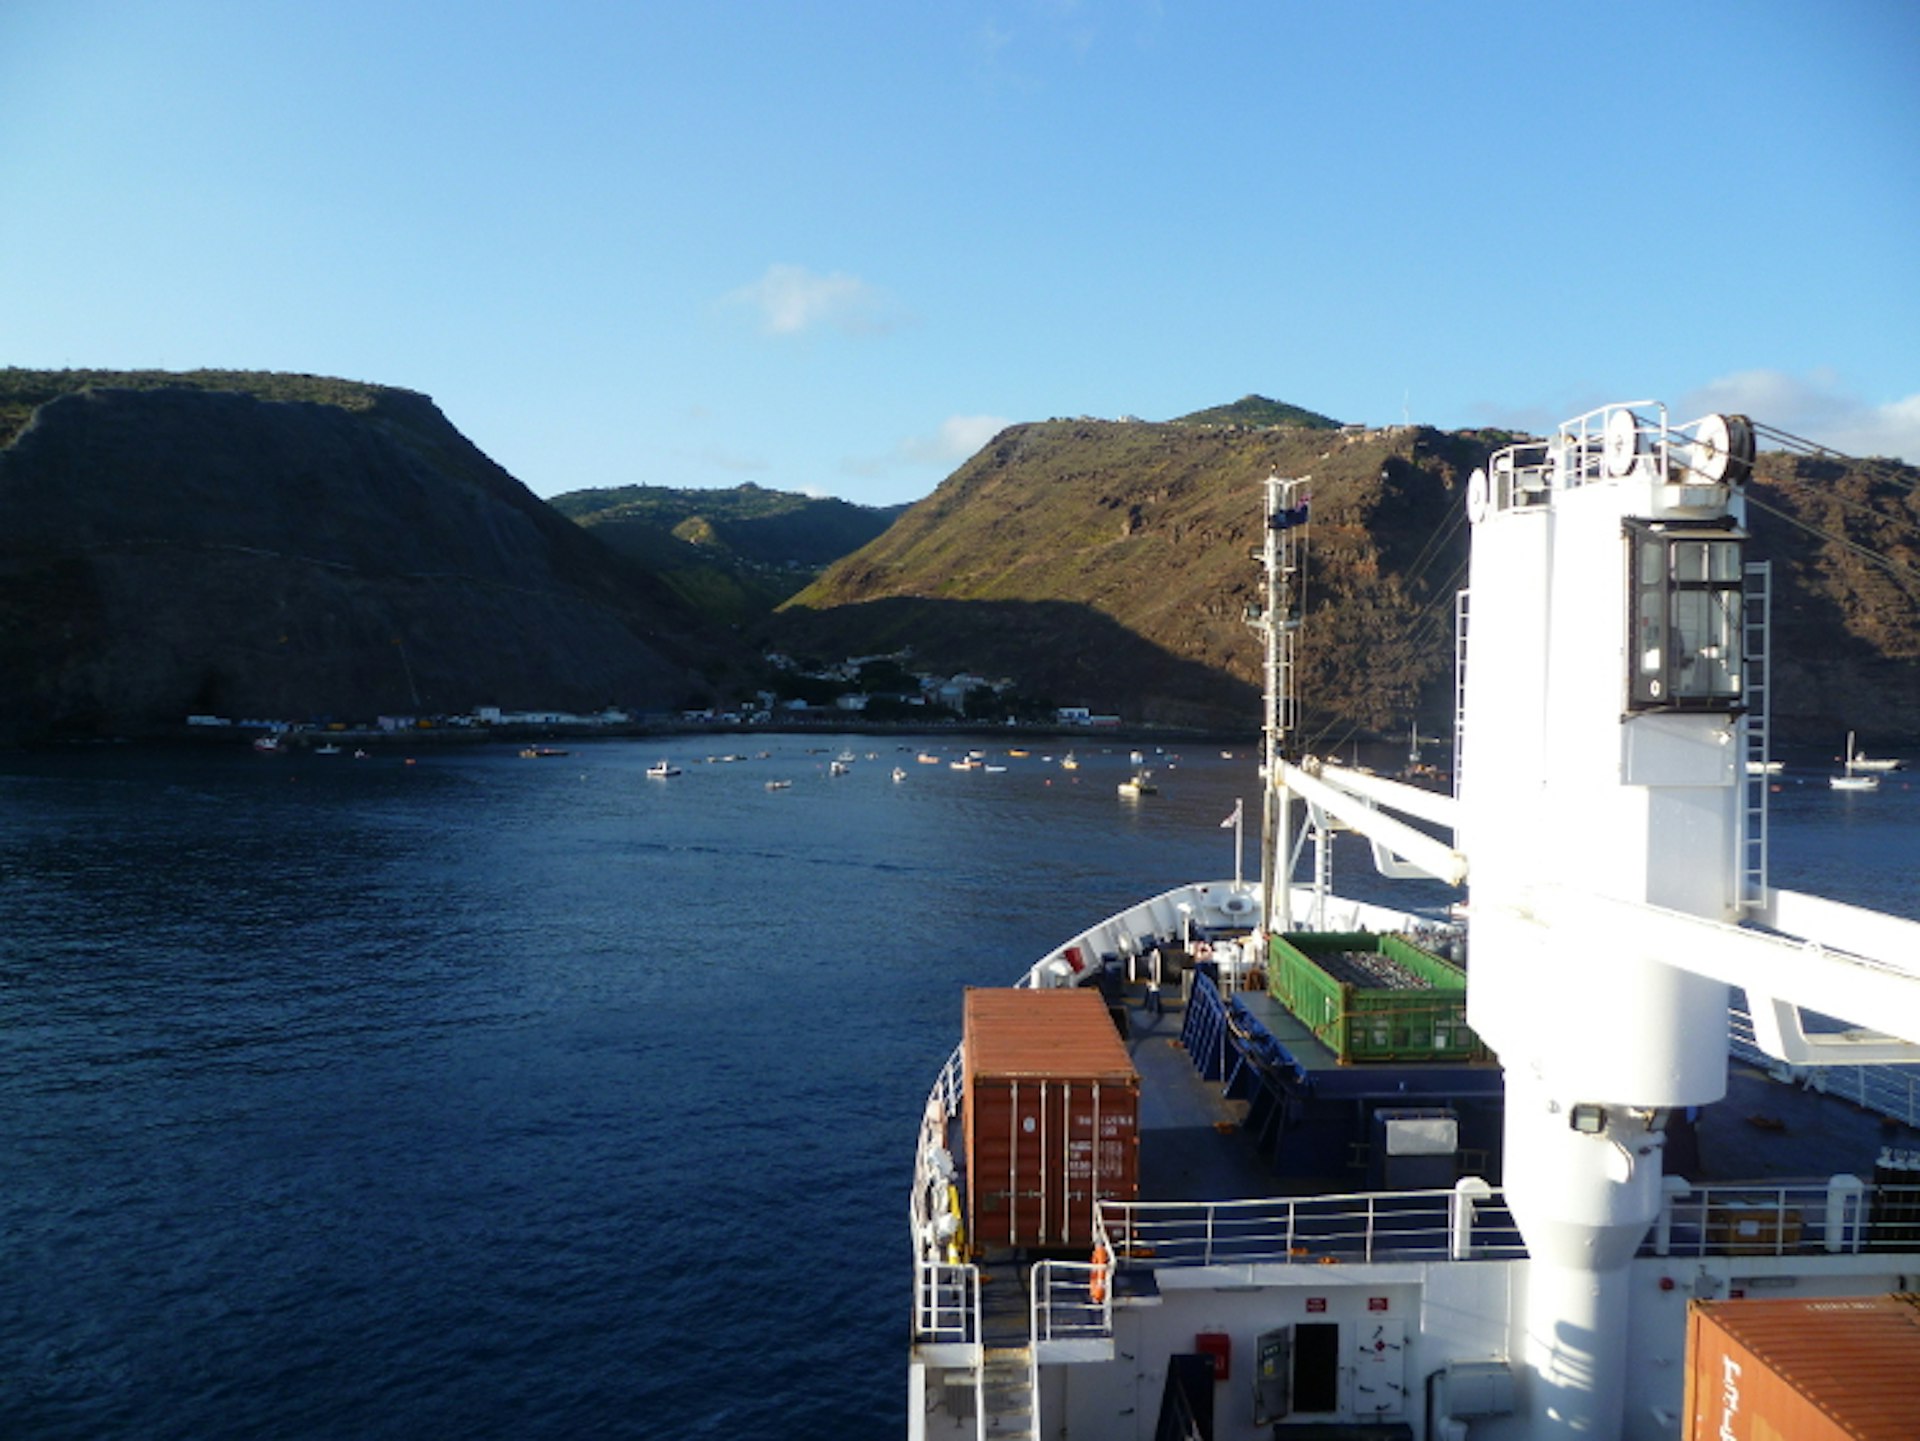 The RMS approaching St Helena. Image courtesy of St Helena Tourism